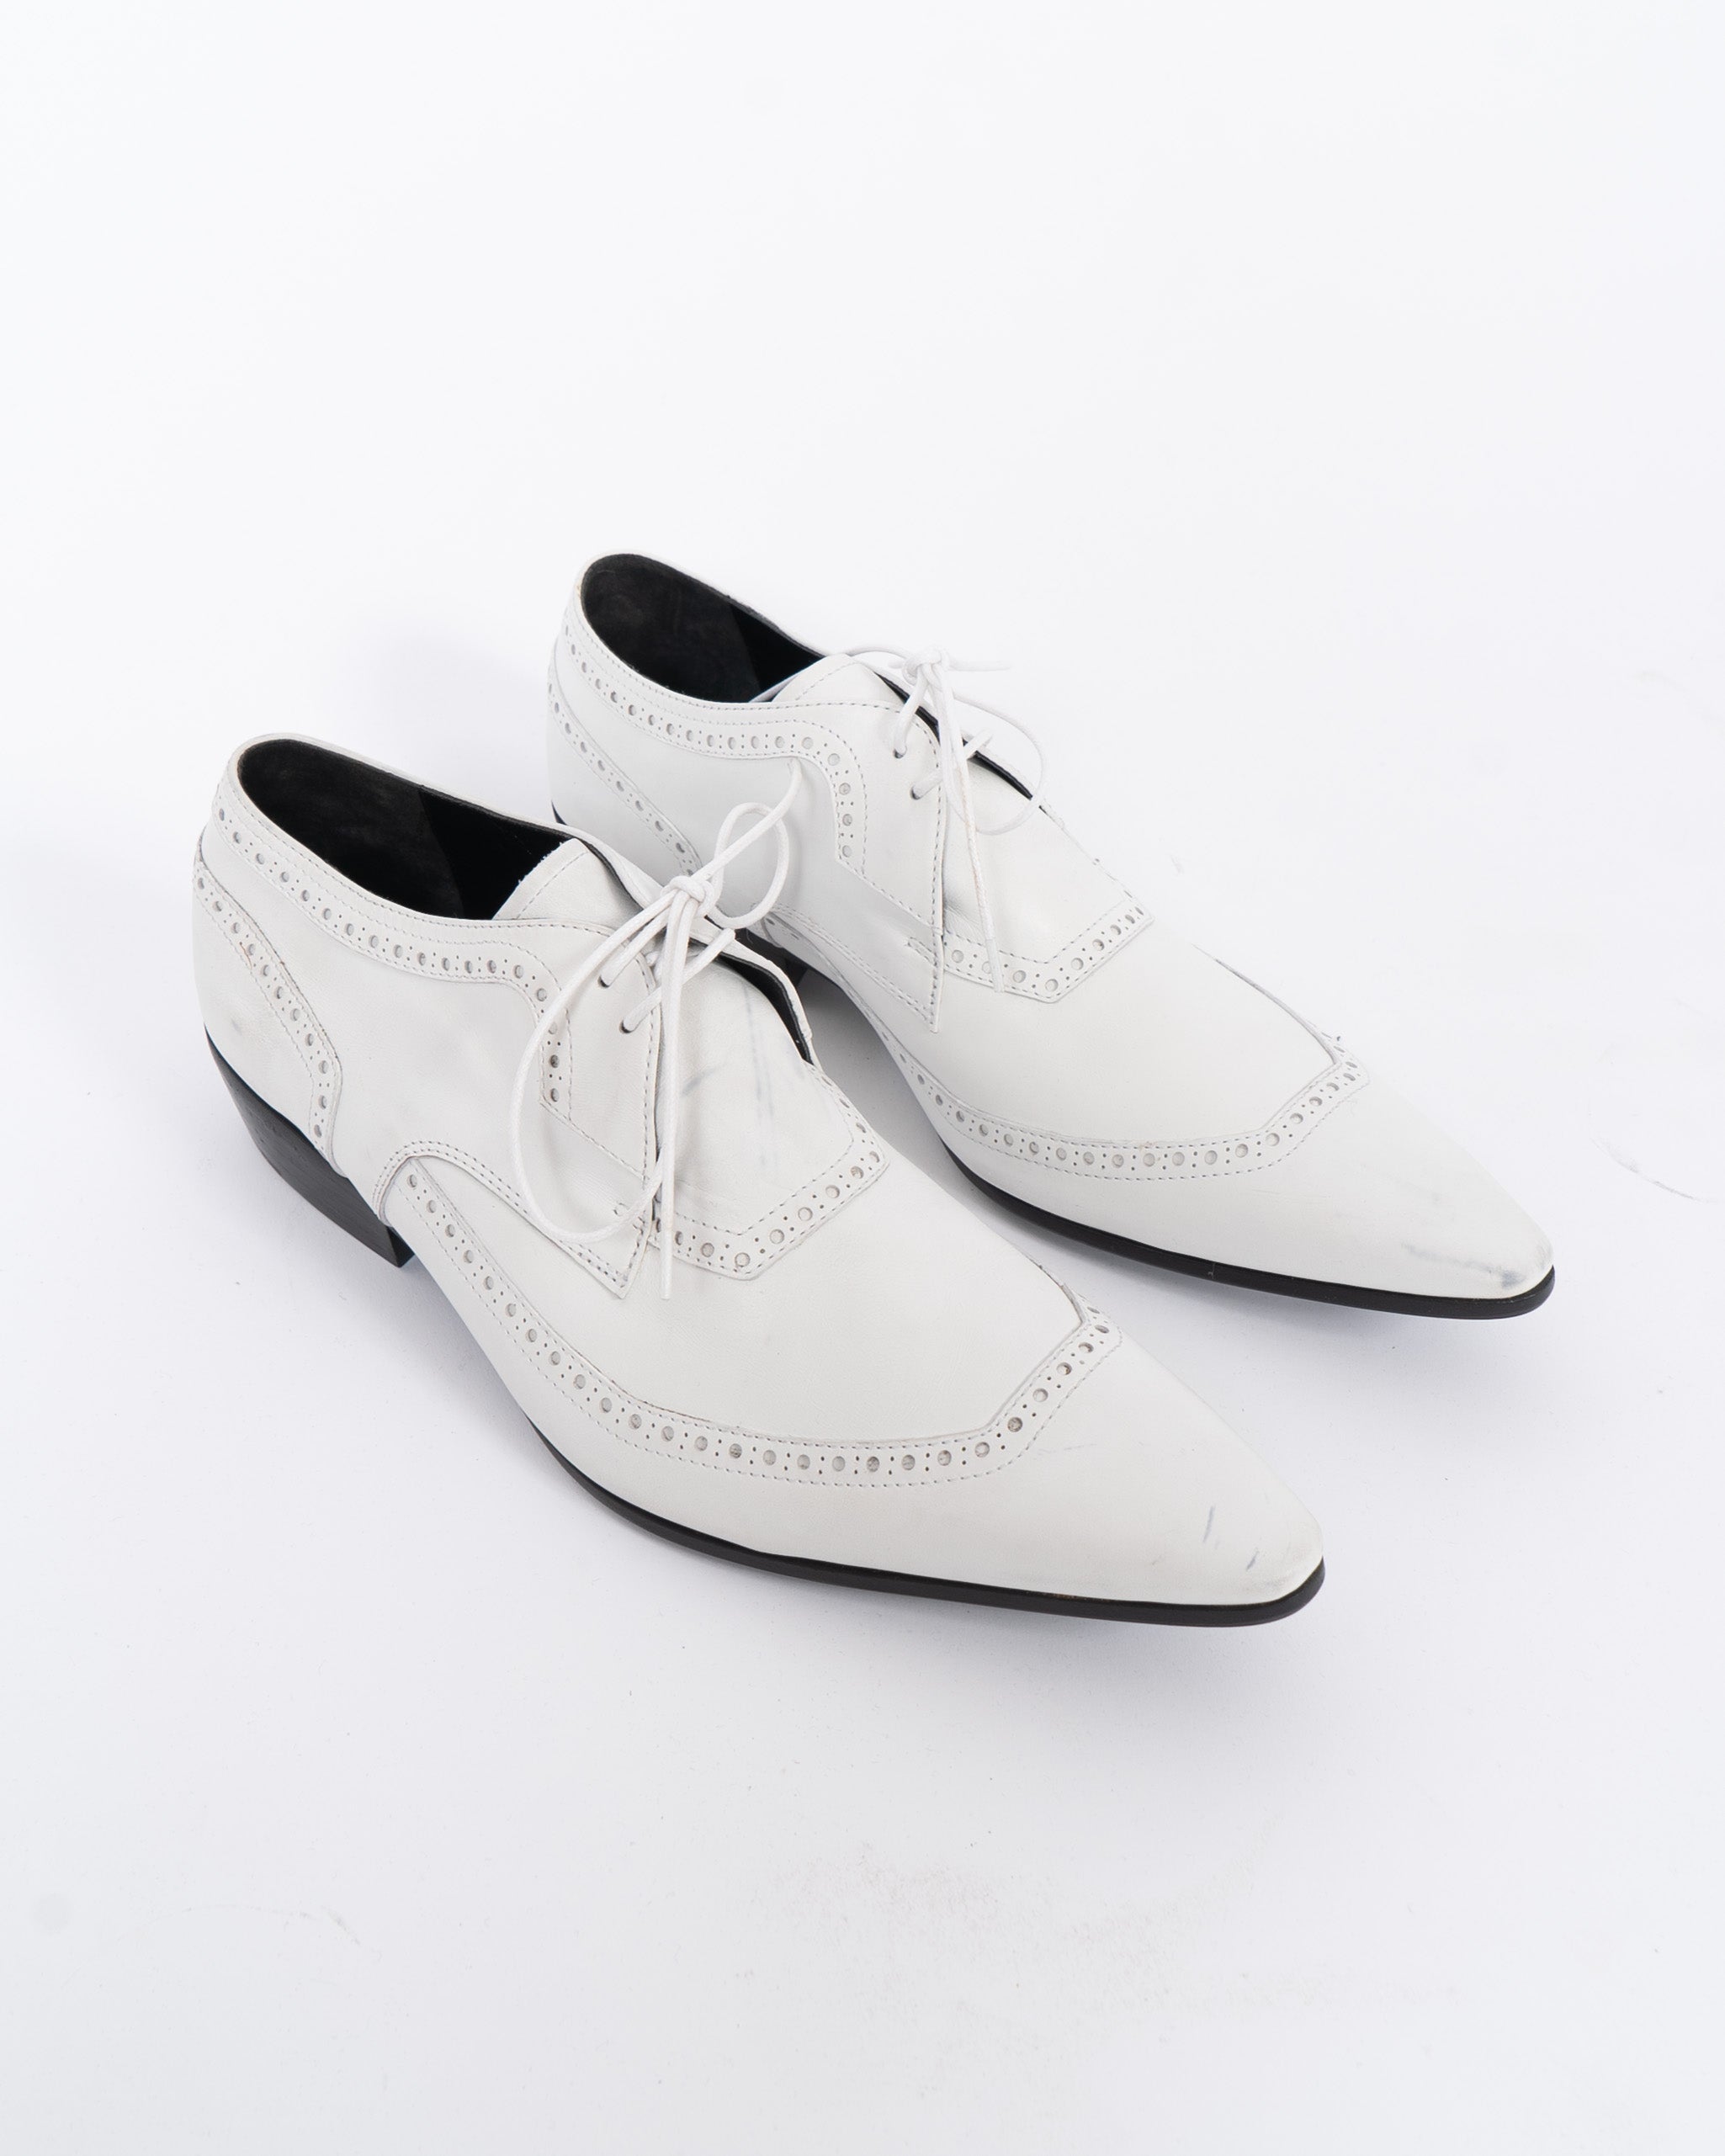 SS17 White Leather Derbies Sample